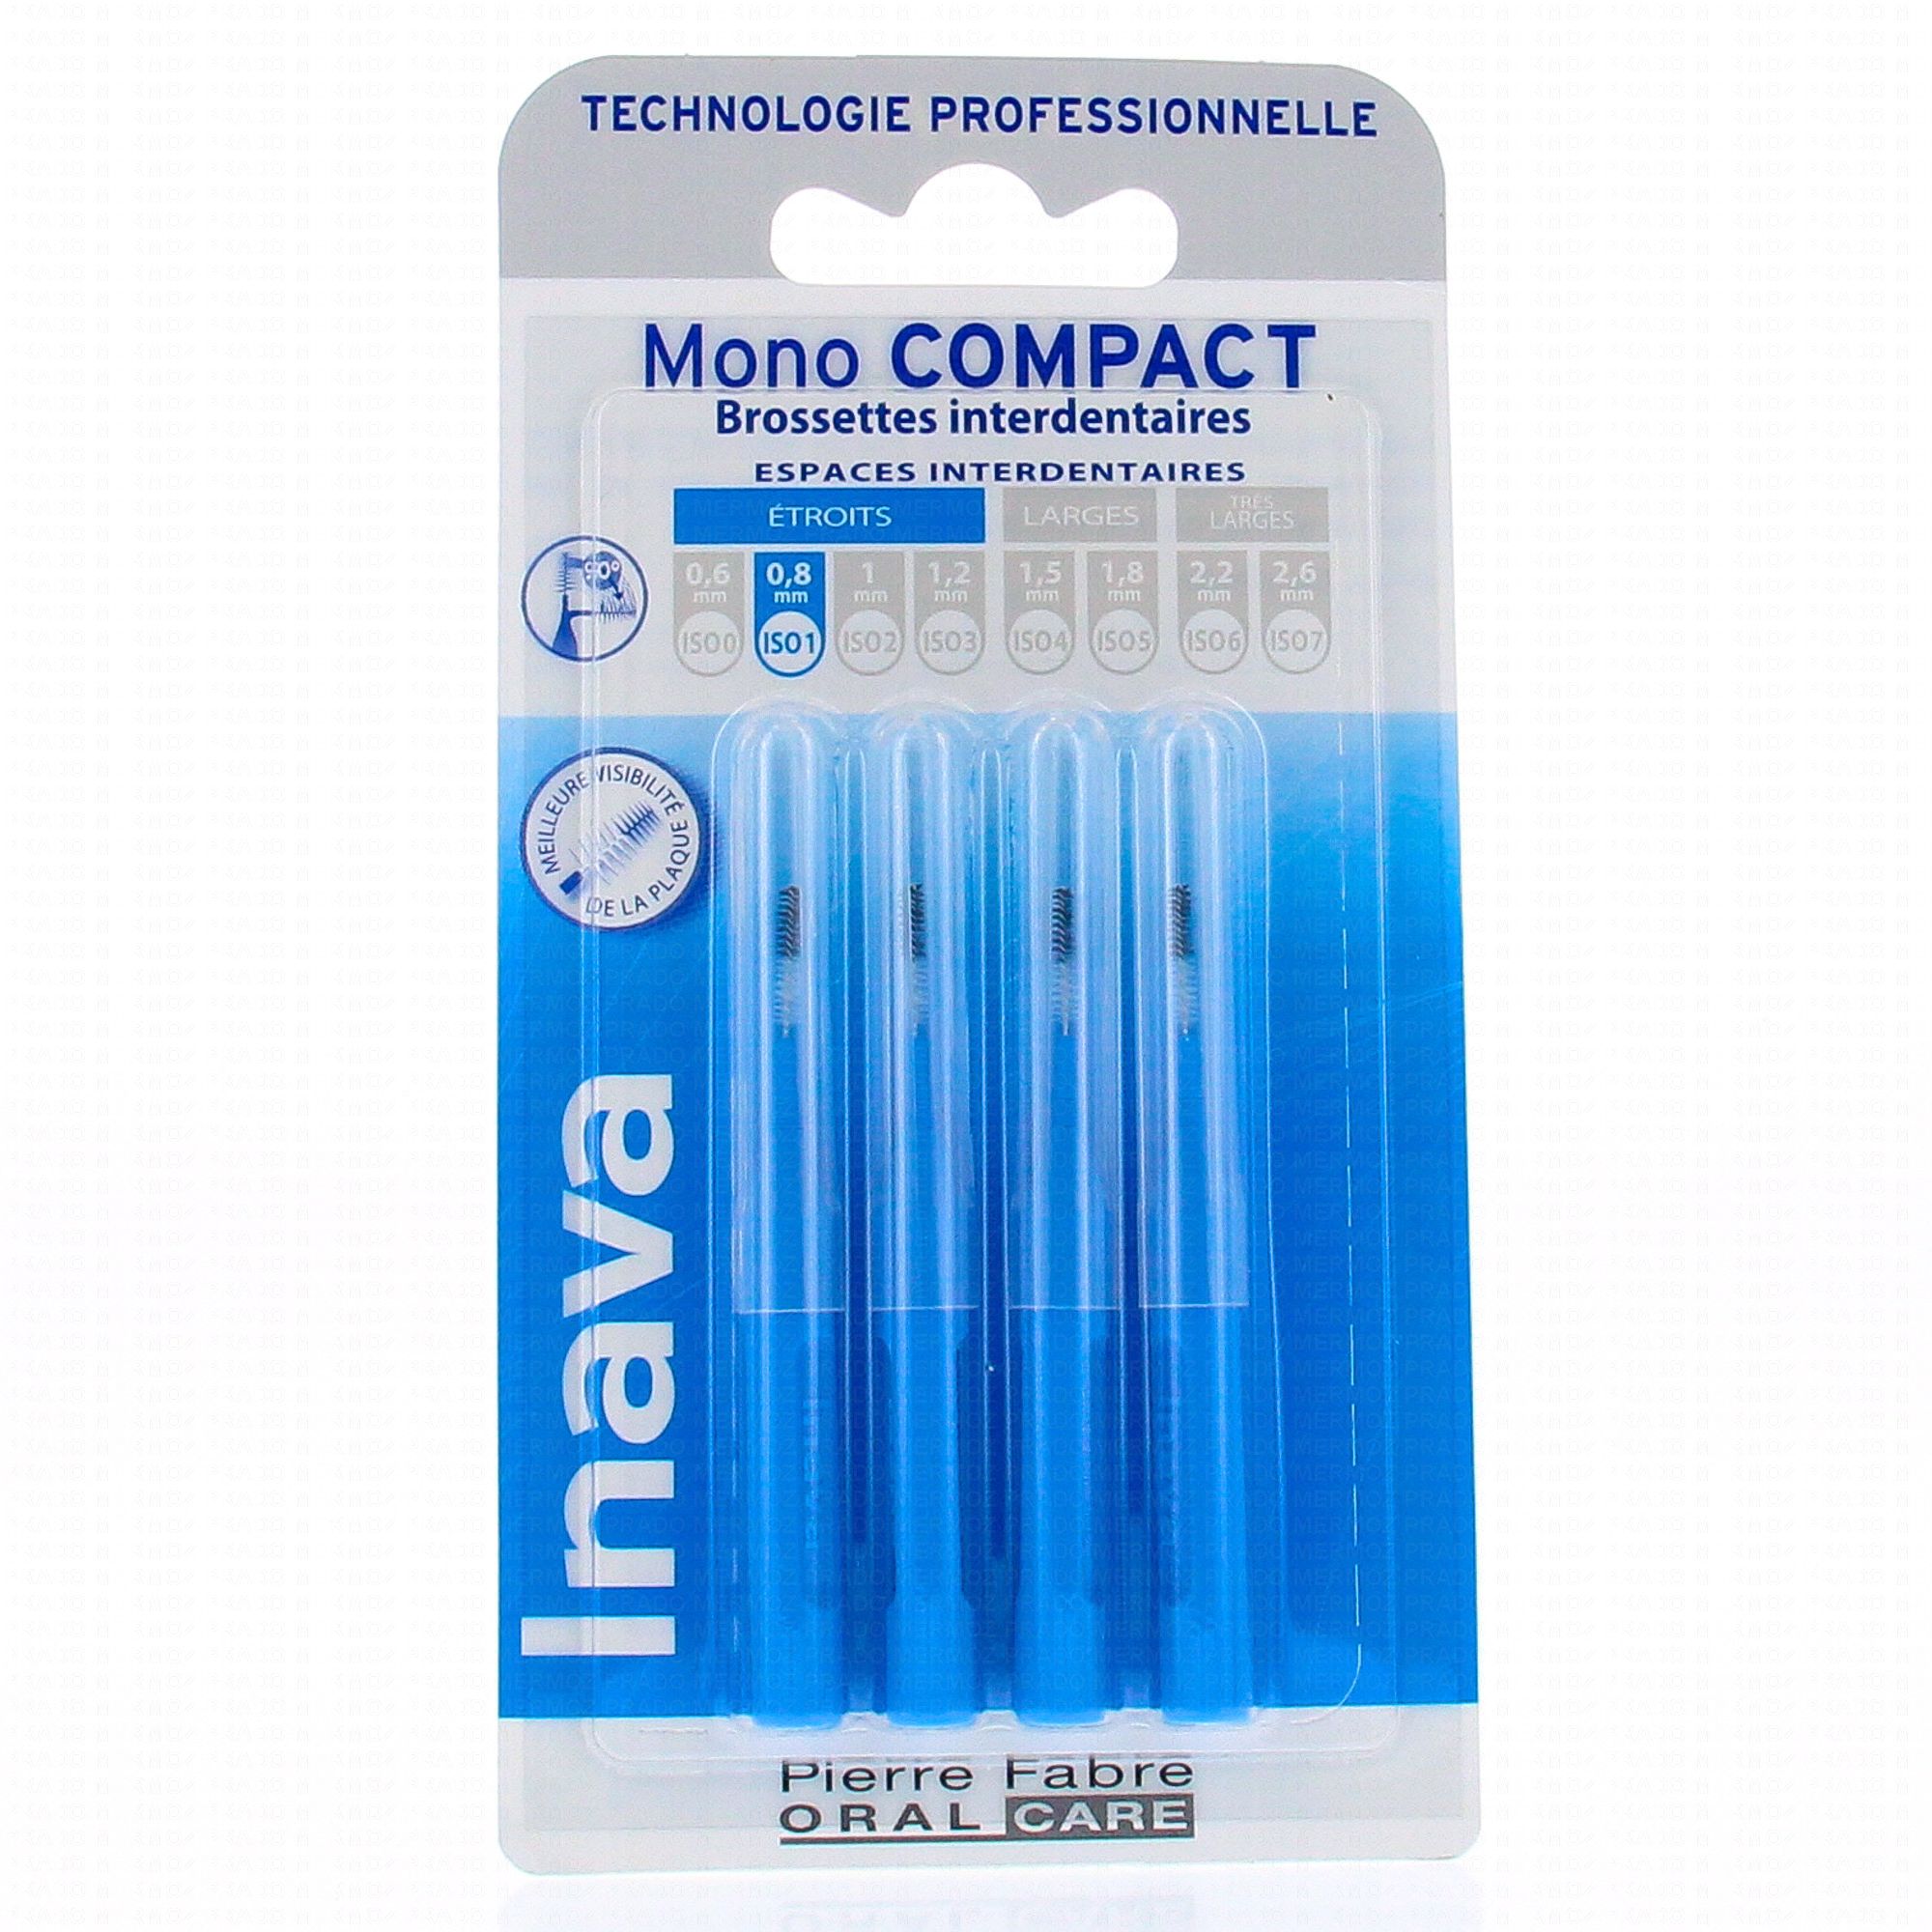 INAVA Brossette interdentaires ISO1 étroits monocompact 0.8mm pack